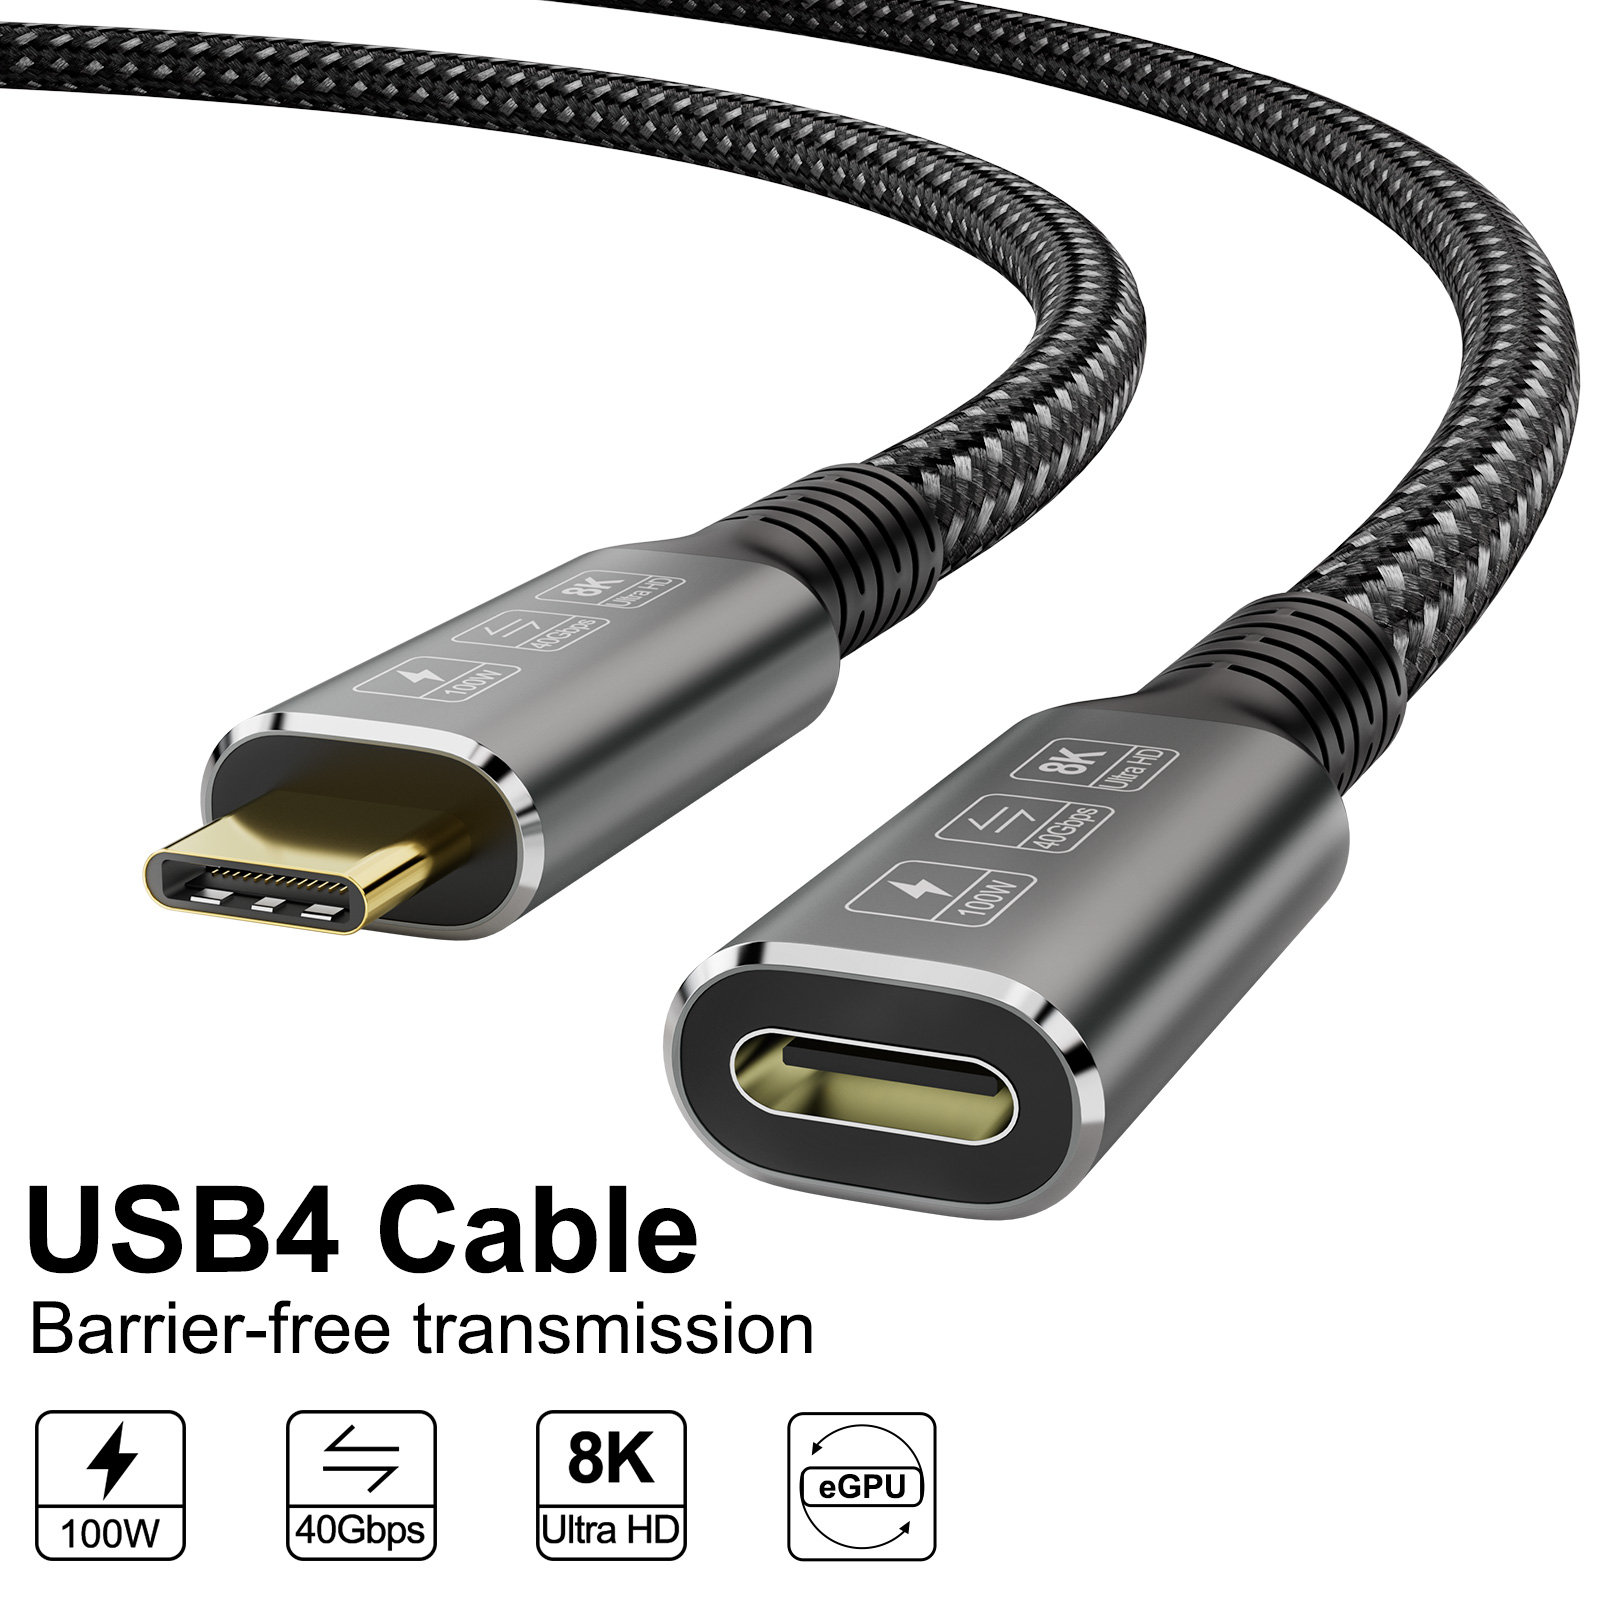 CableDeconn USB4 8K Cable 0.8M Thunderbolt 4 Compatible USB 4 Type-c Male to Female Extension Cable Ultra HD 8K@60Hz 100W Charging 40Gbps Data Transfer Compatible with External SSD eGPU F0408